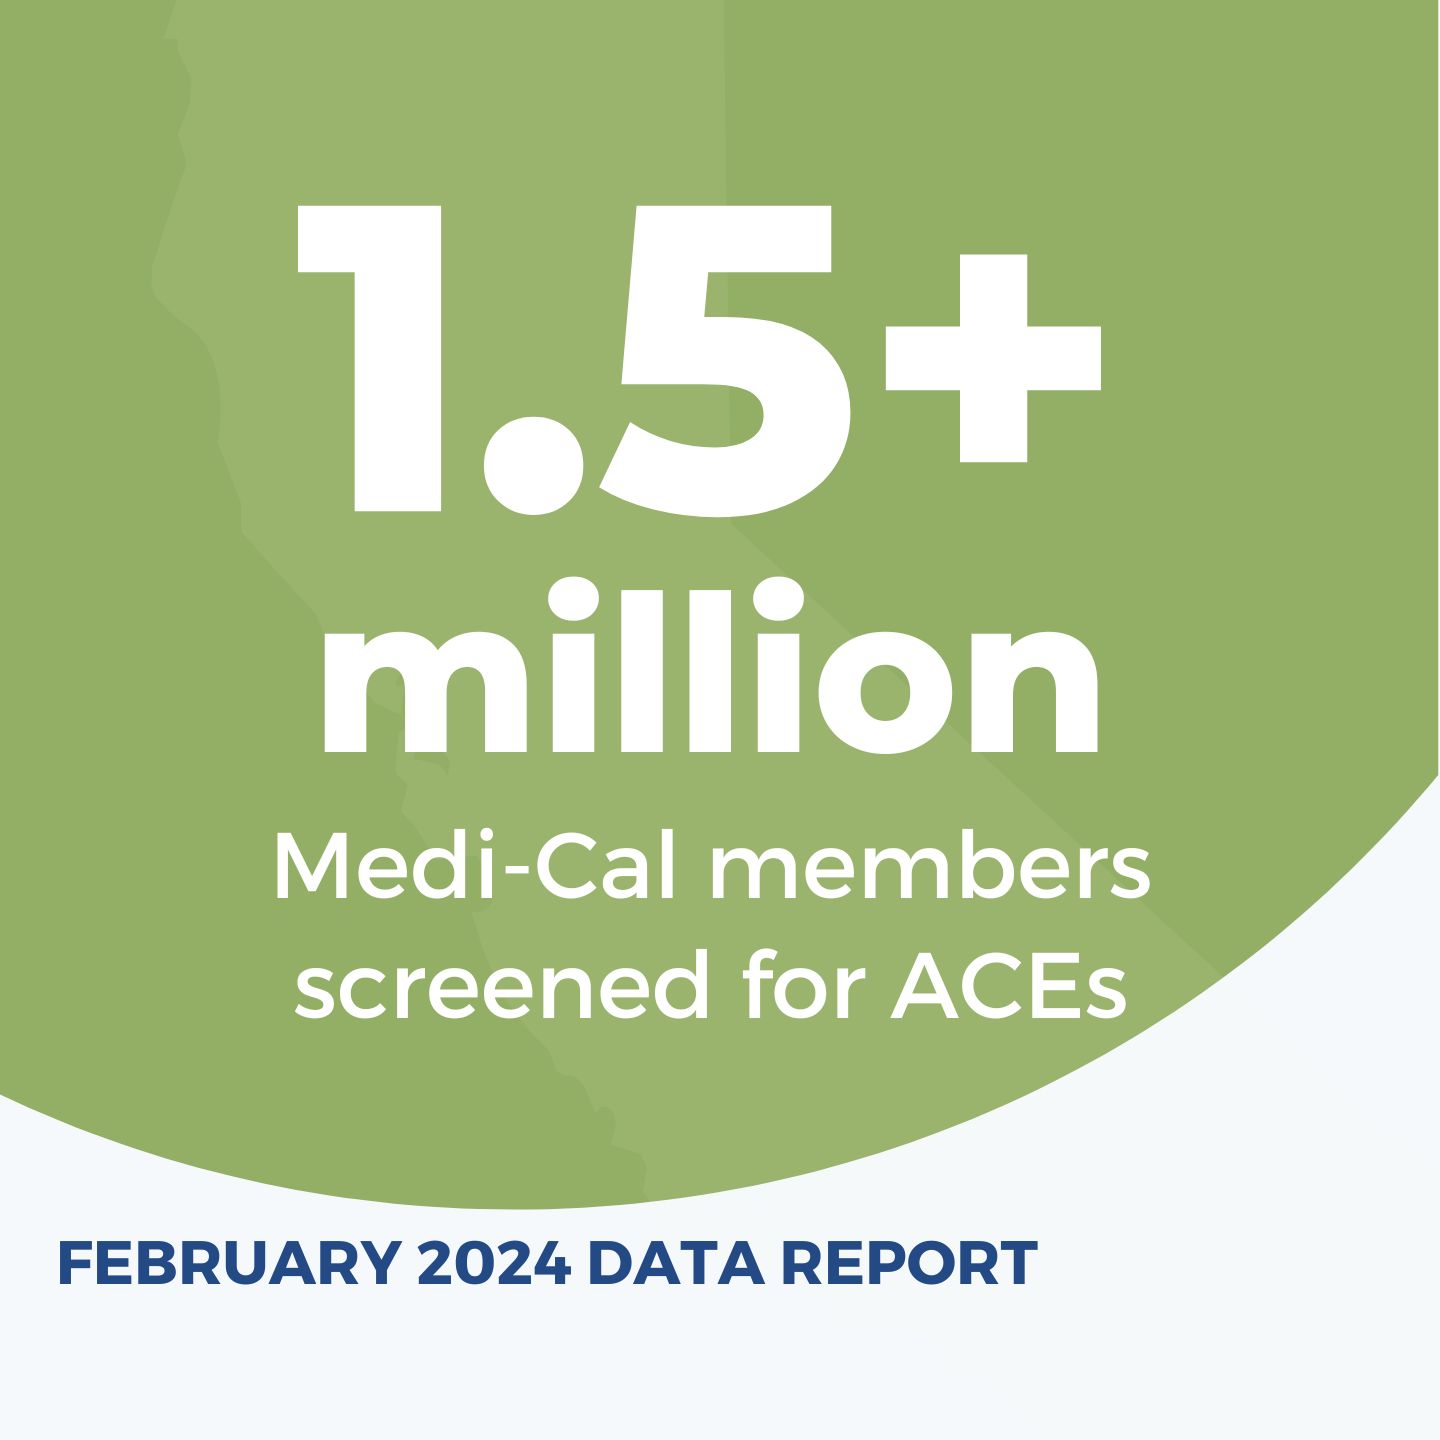 Image for February 2024 Quarterly Data Report: More than 1.5 Million Medi-Cal Members Have Been Screened for ACEs